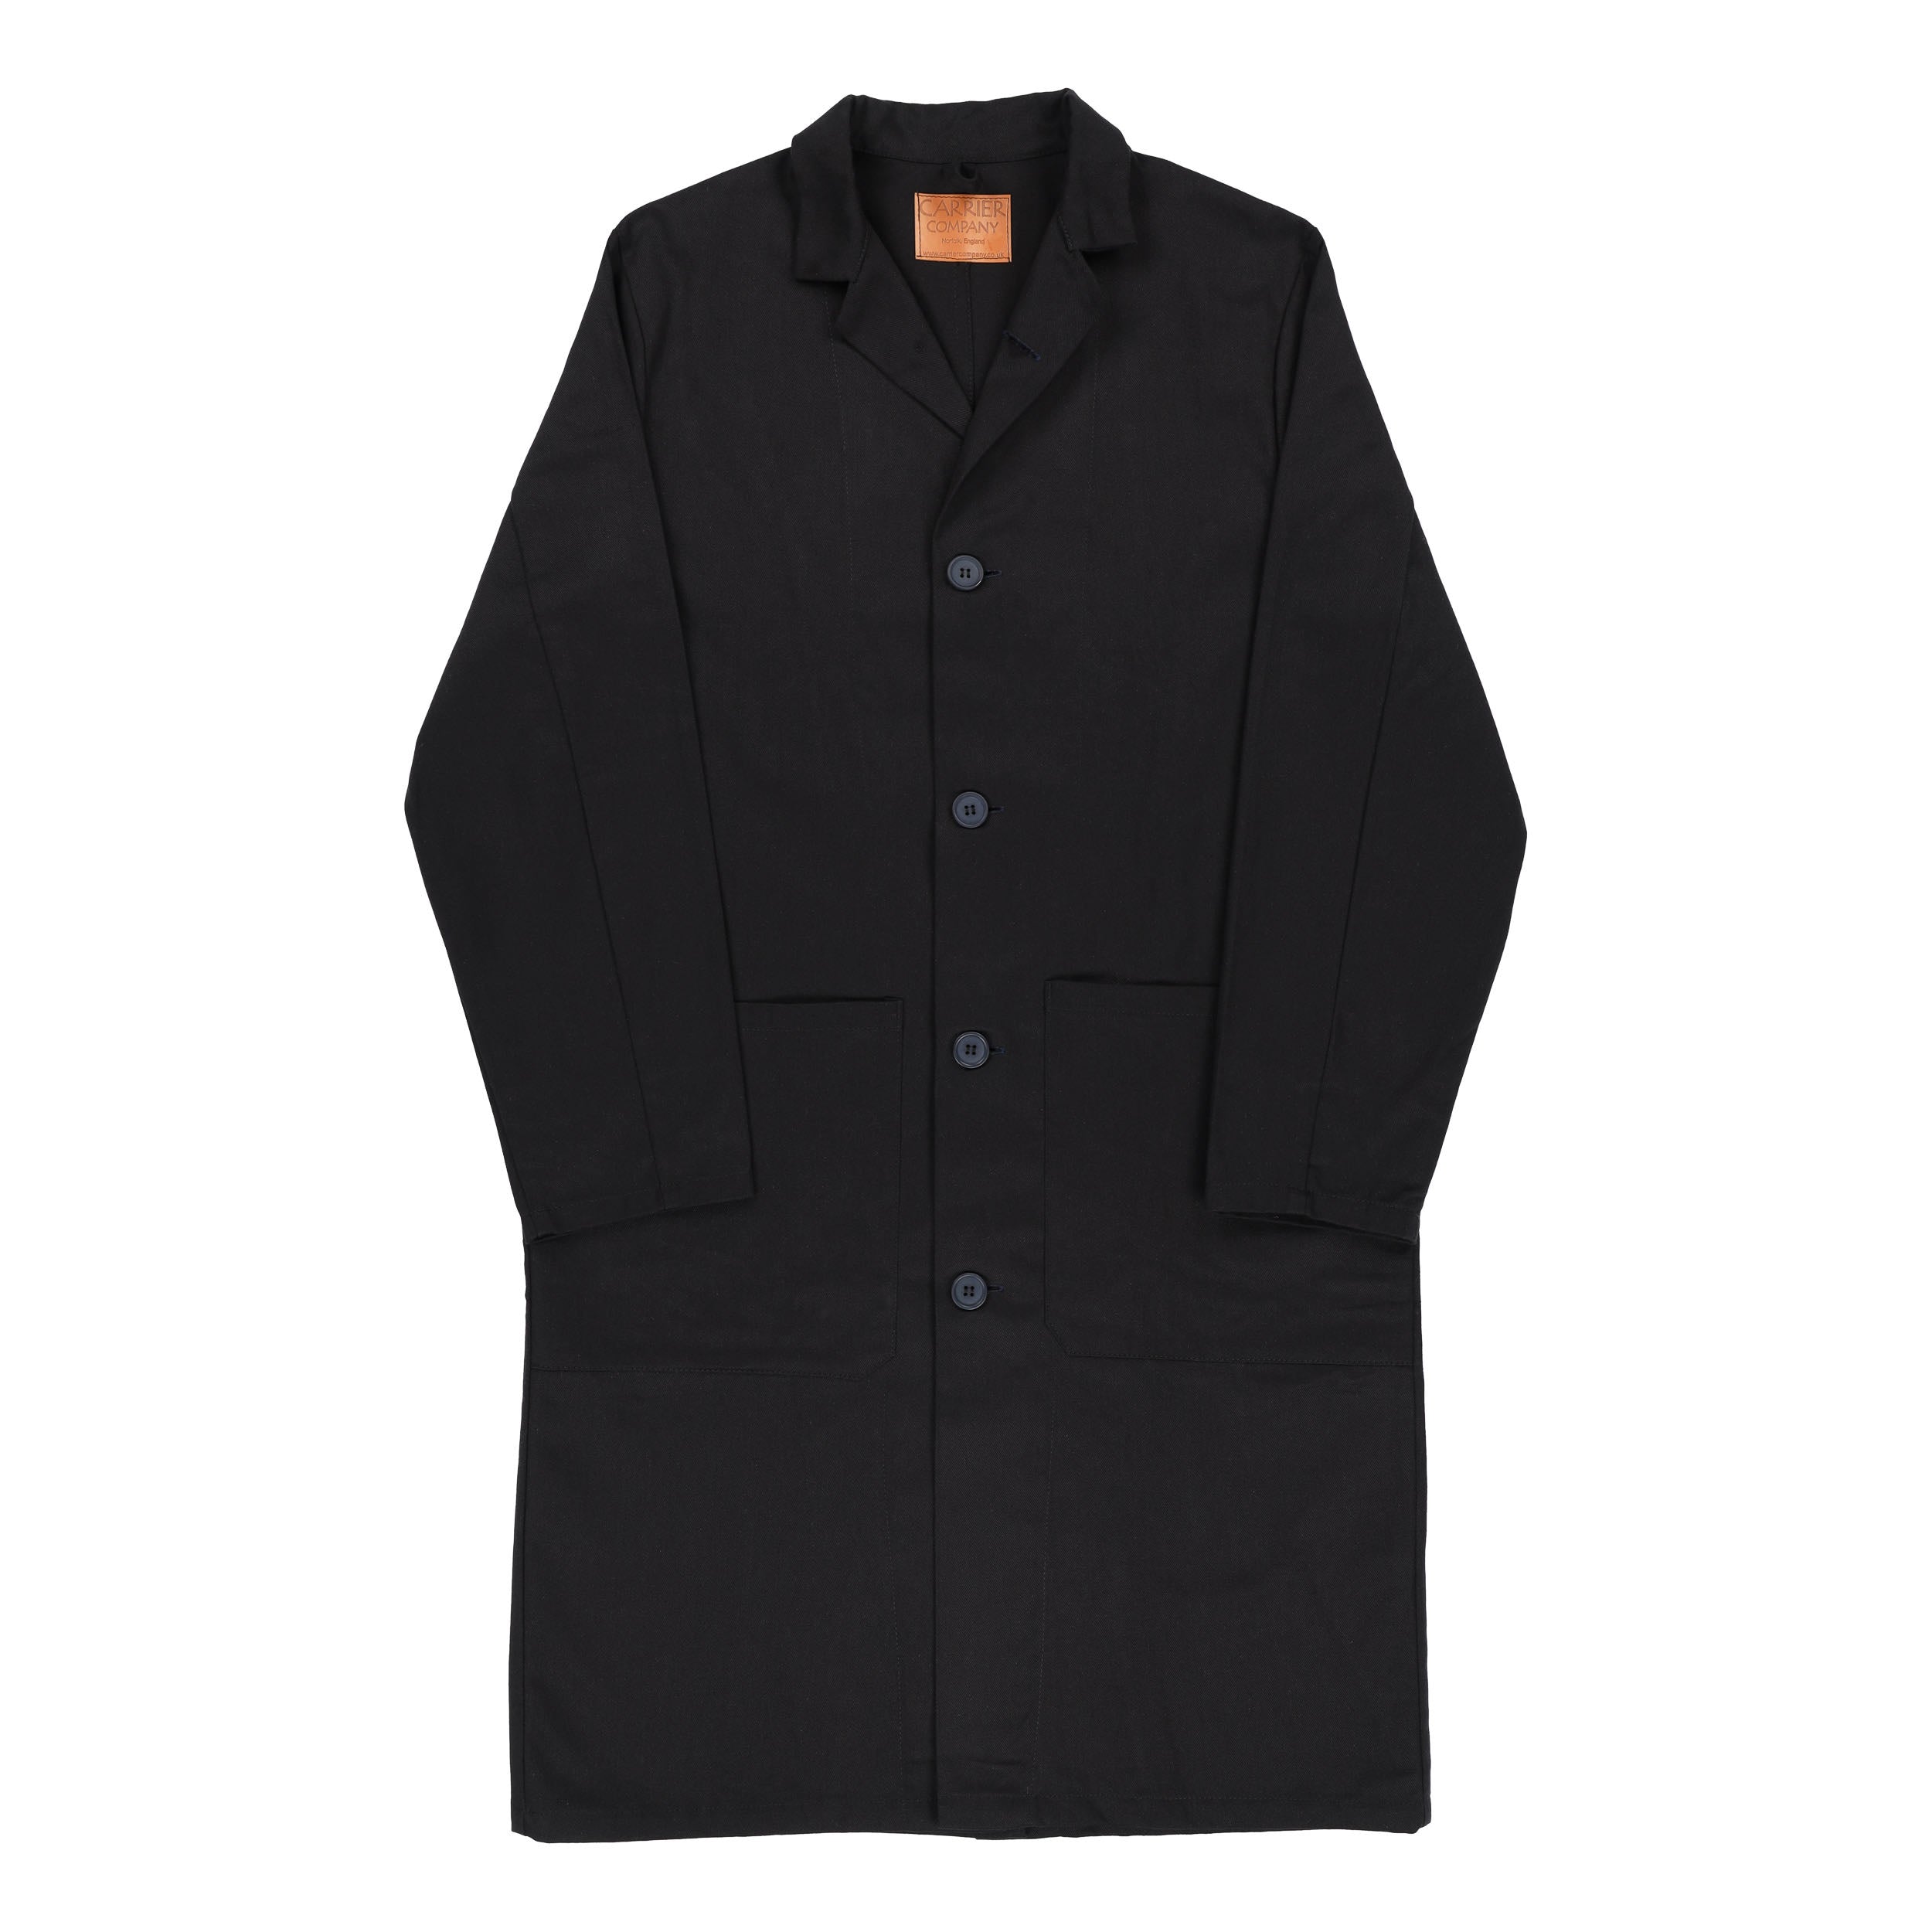 Carrier Company Stockman's Coat in Black Drill